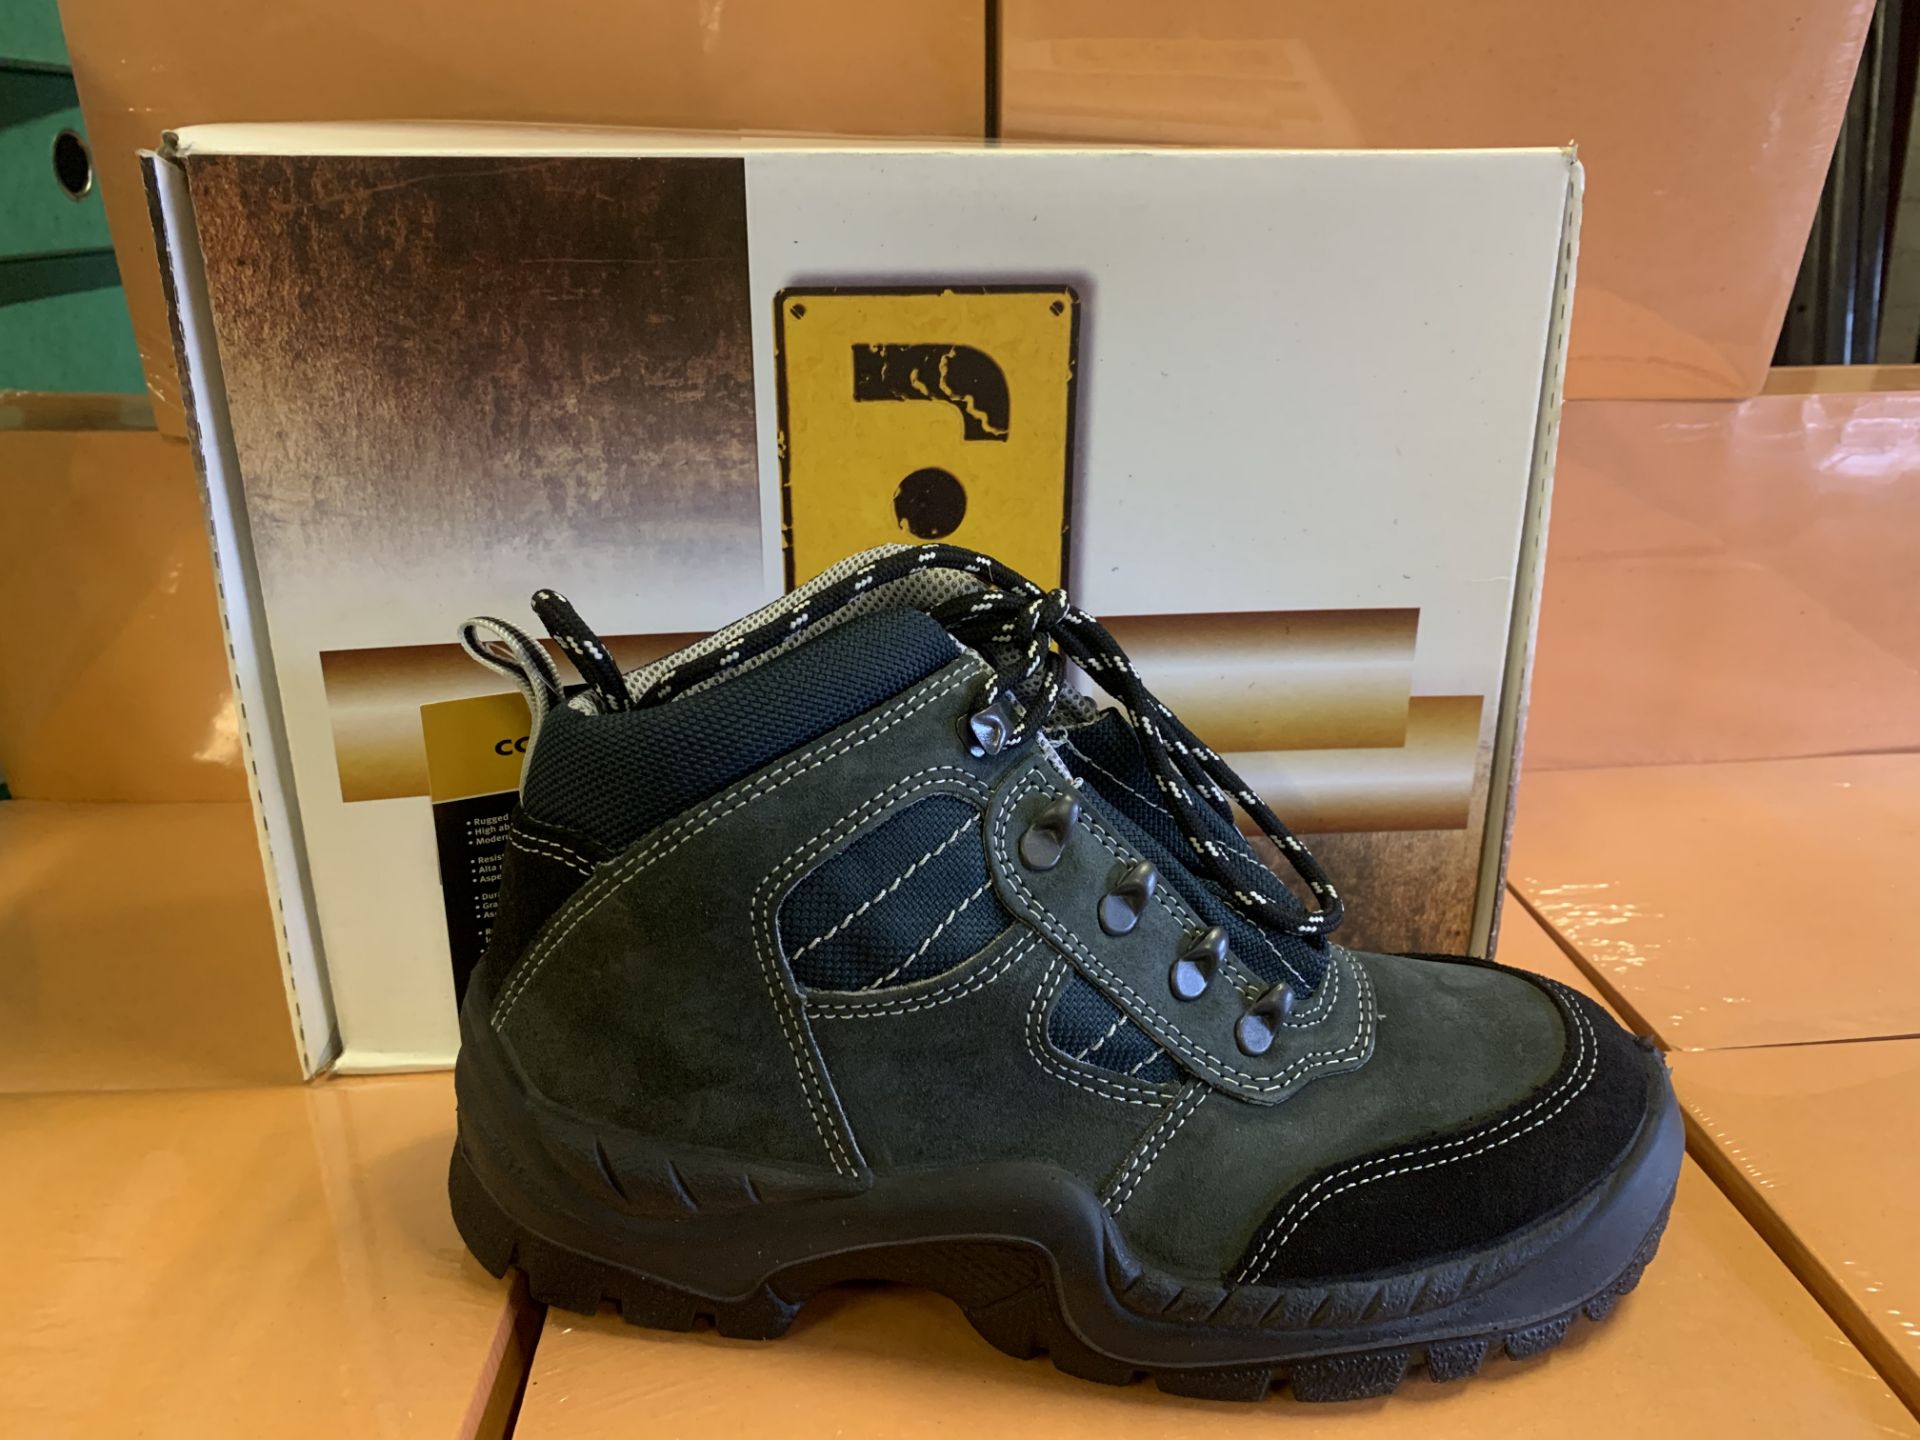 6 X ECJ SAFETY BOOTS SIZE 7